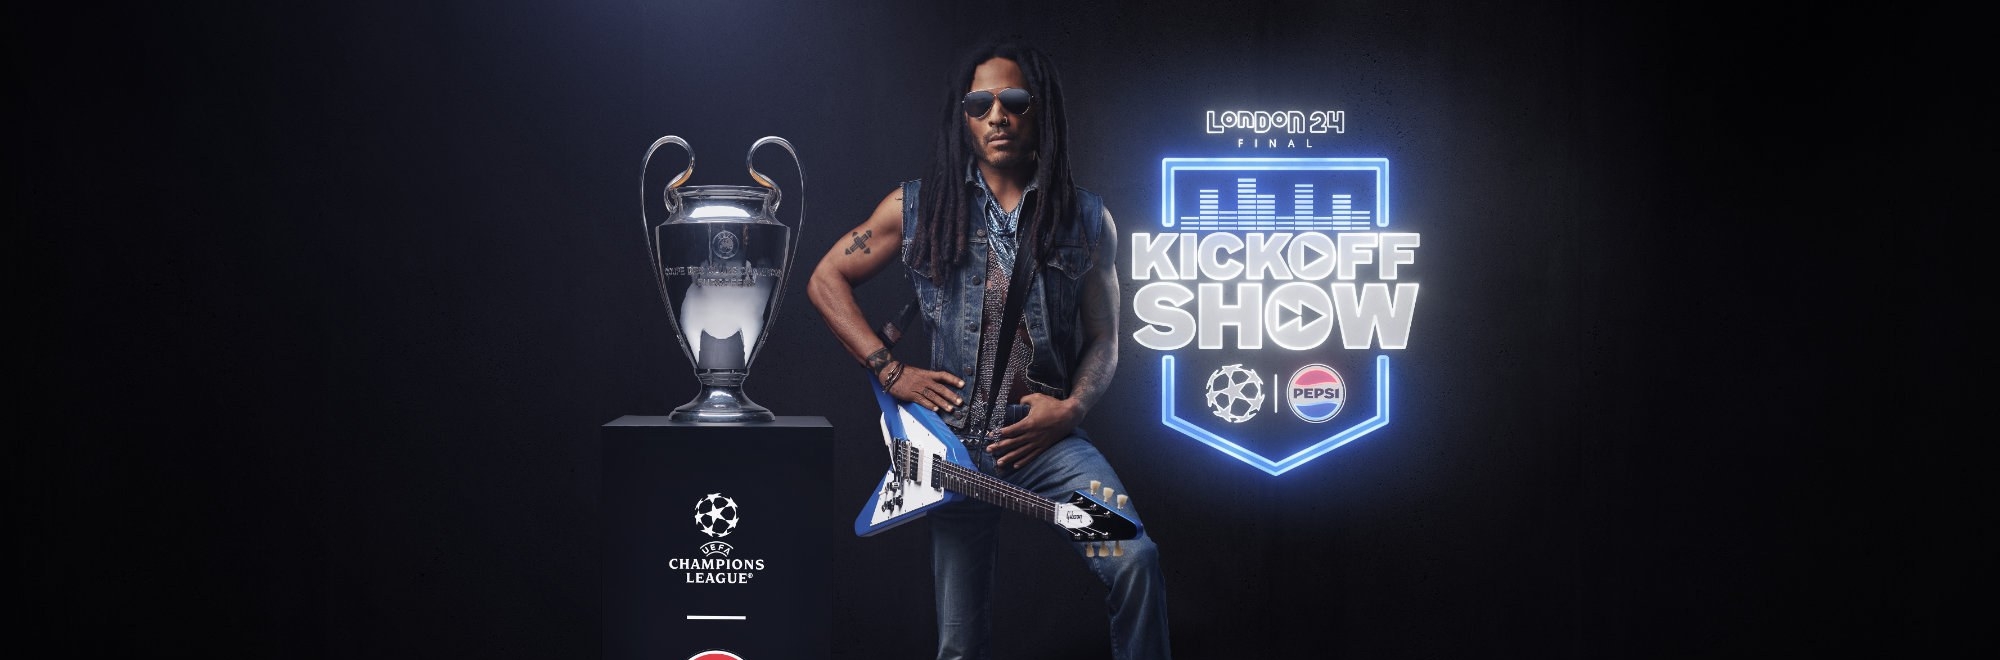 Lenny Kravitz to rock the UEFA Champions League final kick off show presented by Pepsi